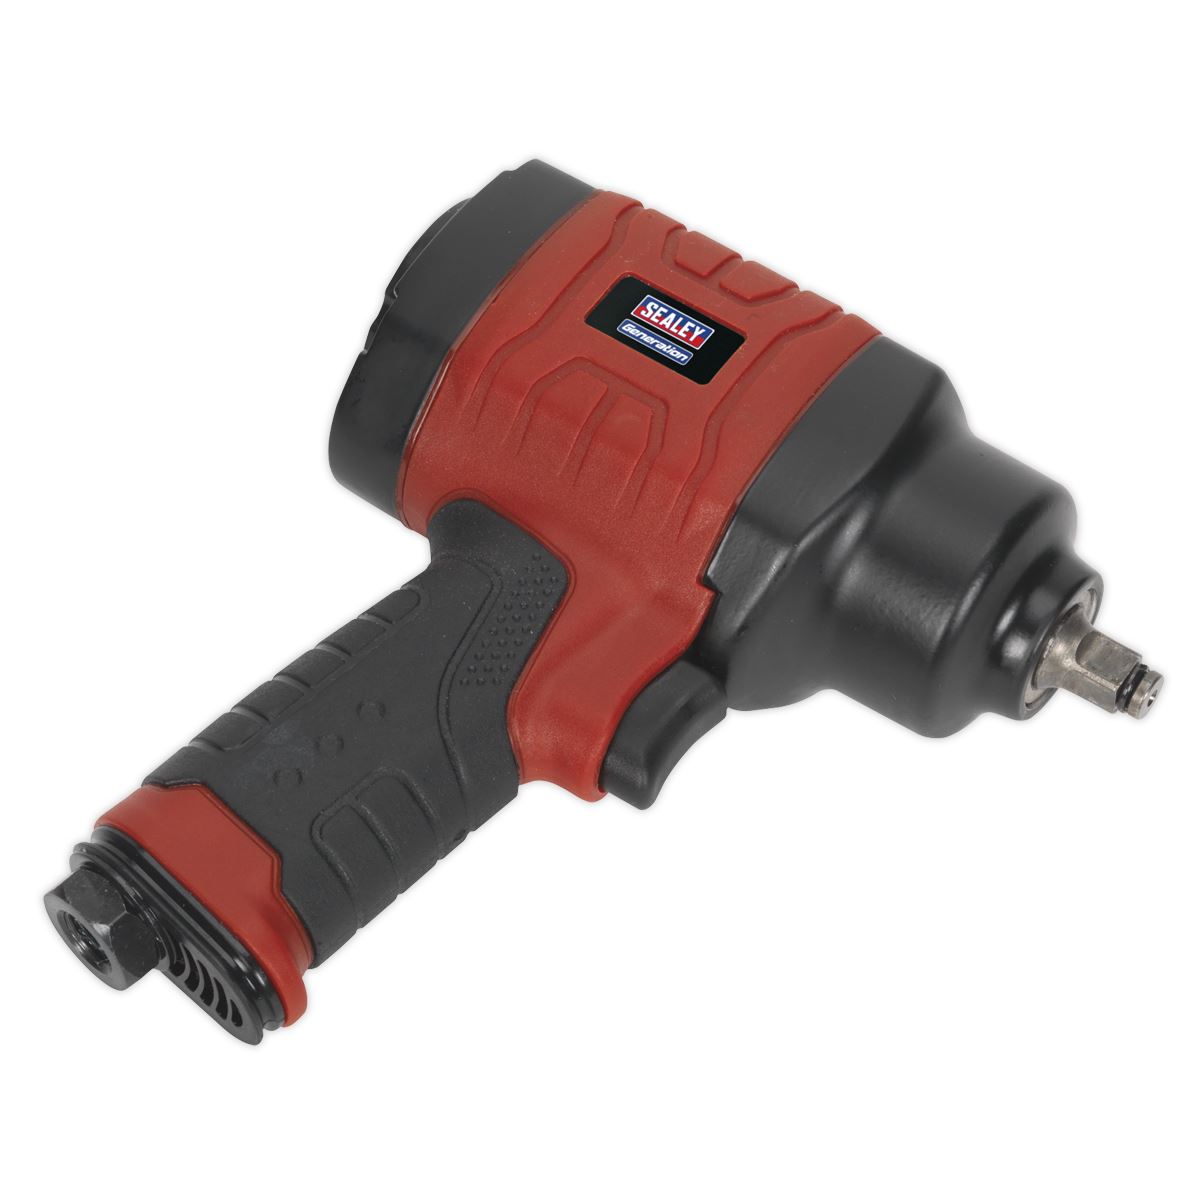 Generation Composite Air Impact Wrench 3/8"Sq Drive - Twin Hammer